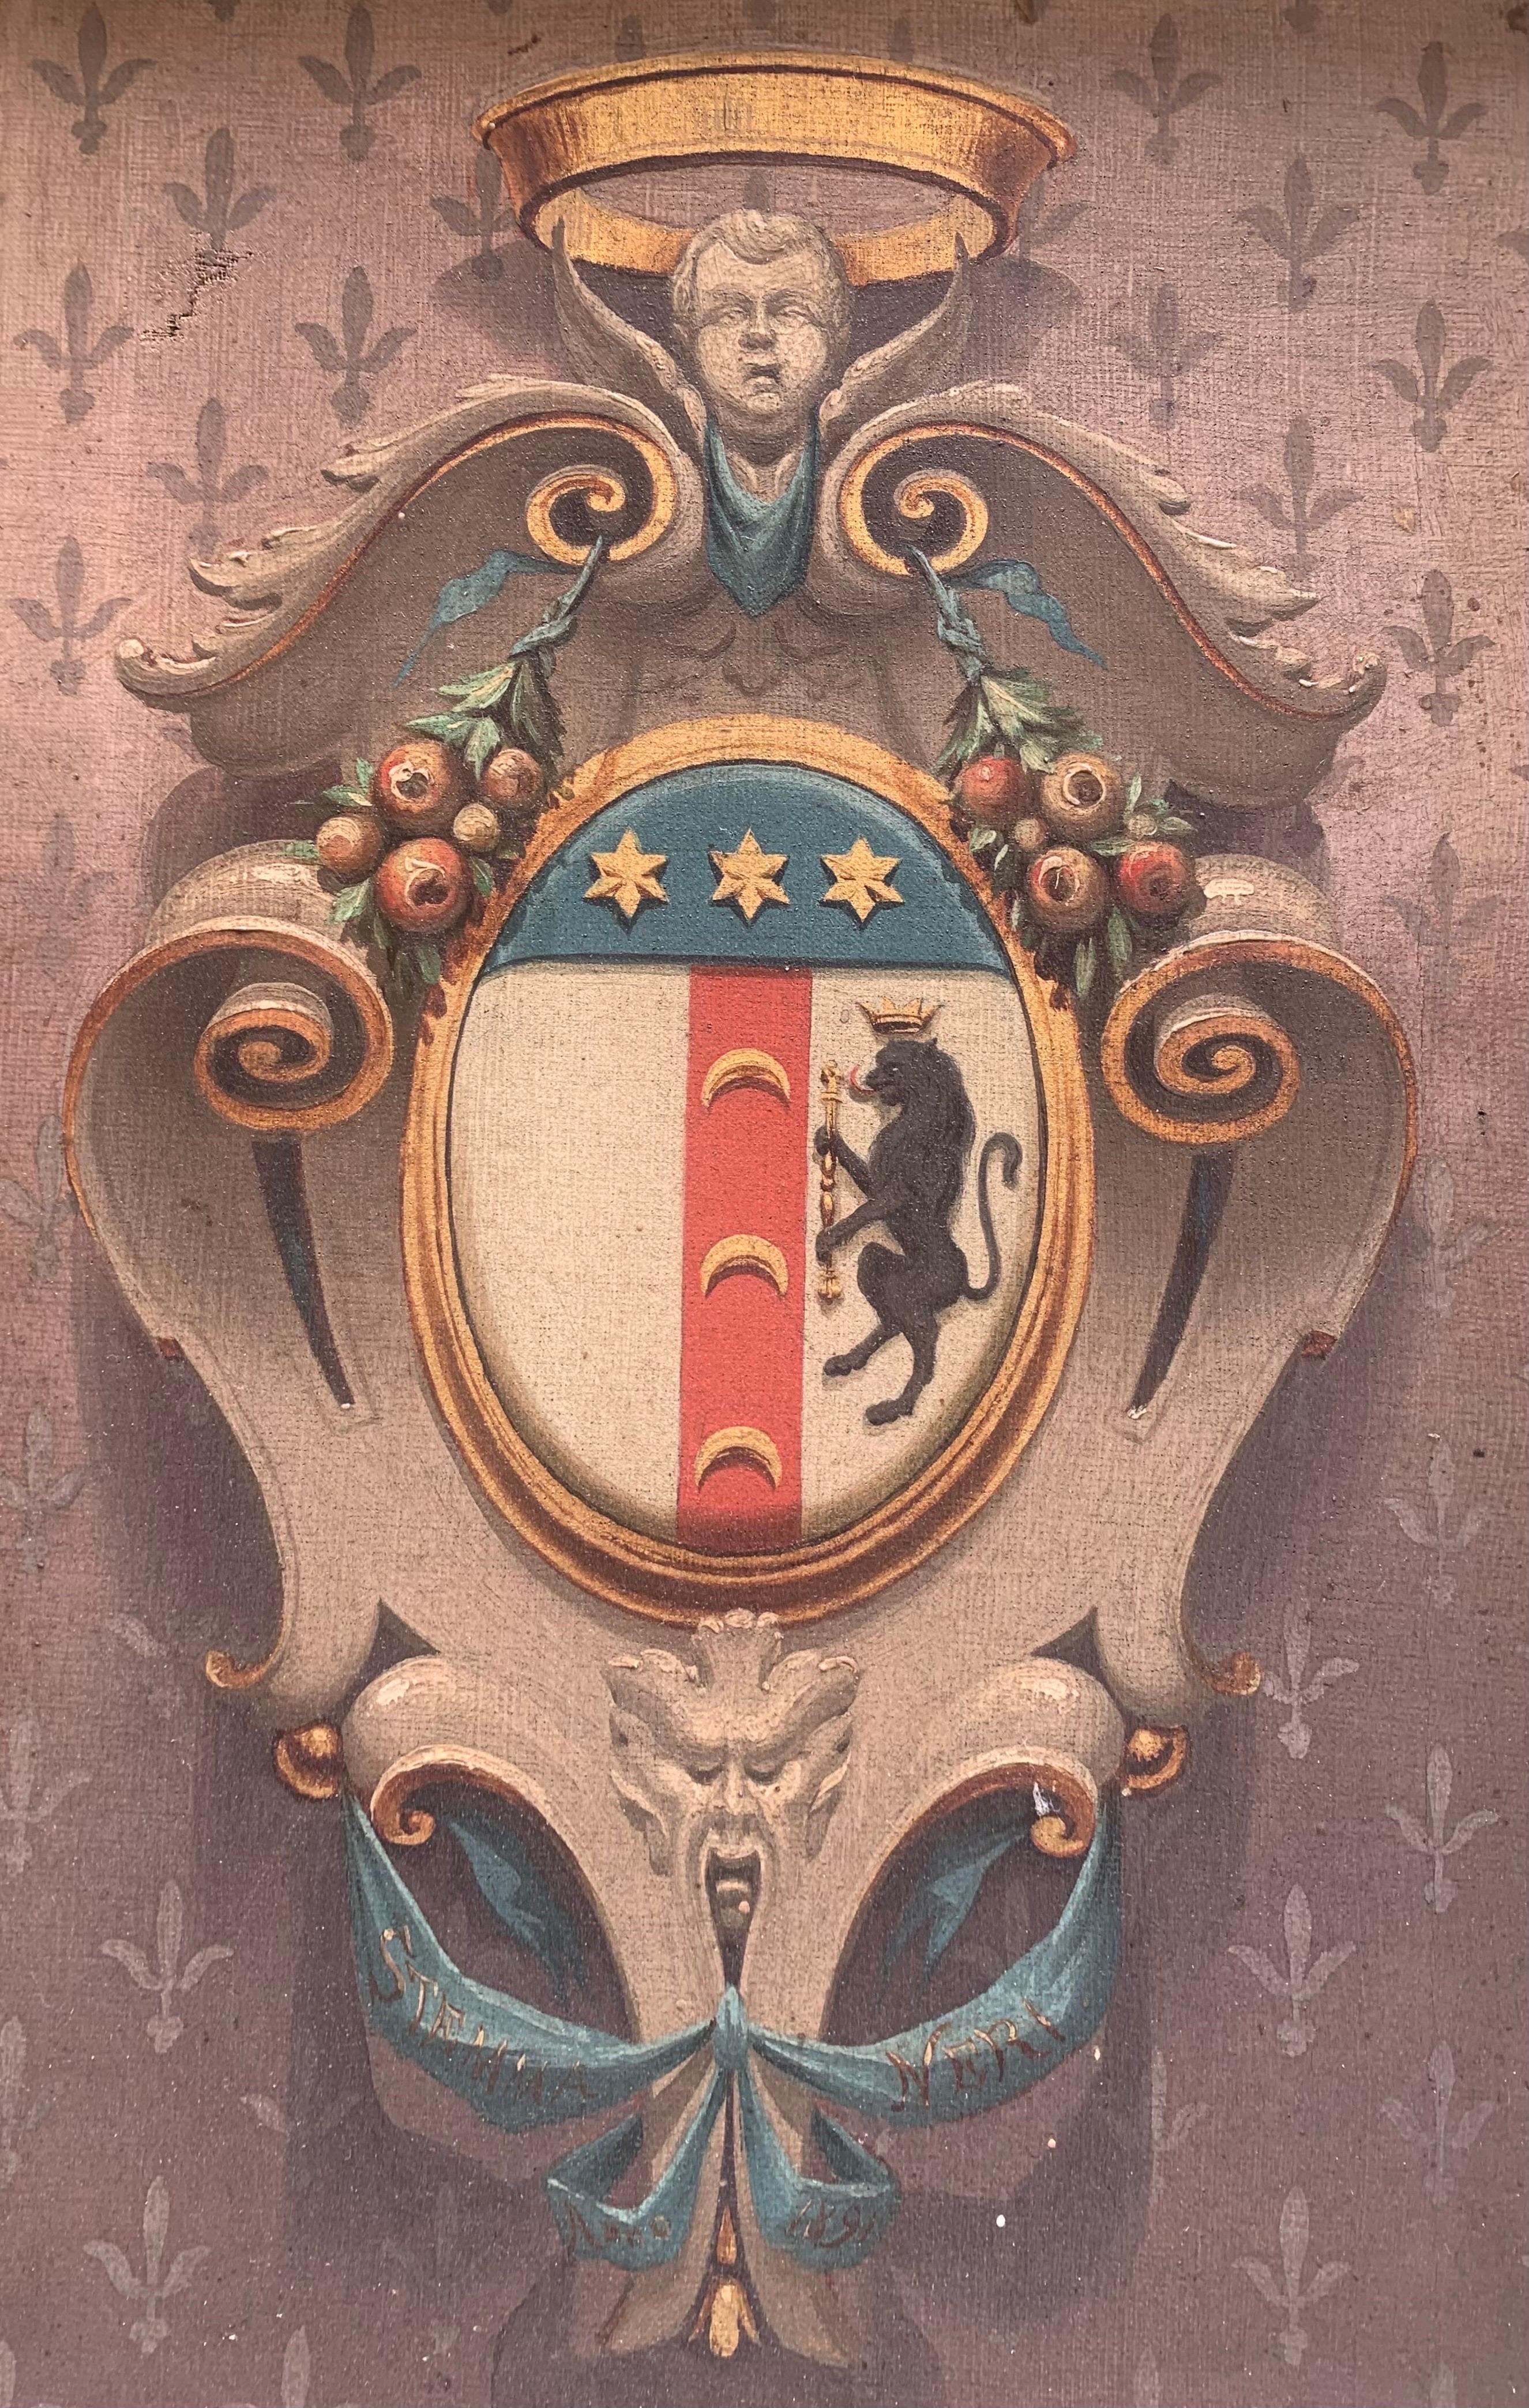 Painted  Coat Of Arms With The Neri Family. Year 1891.